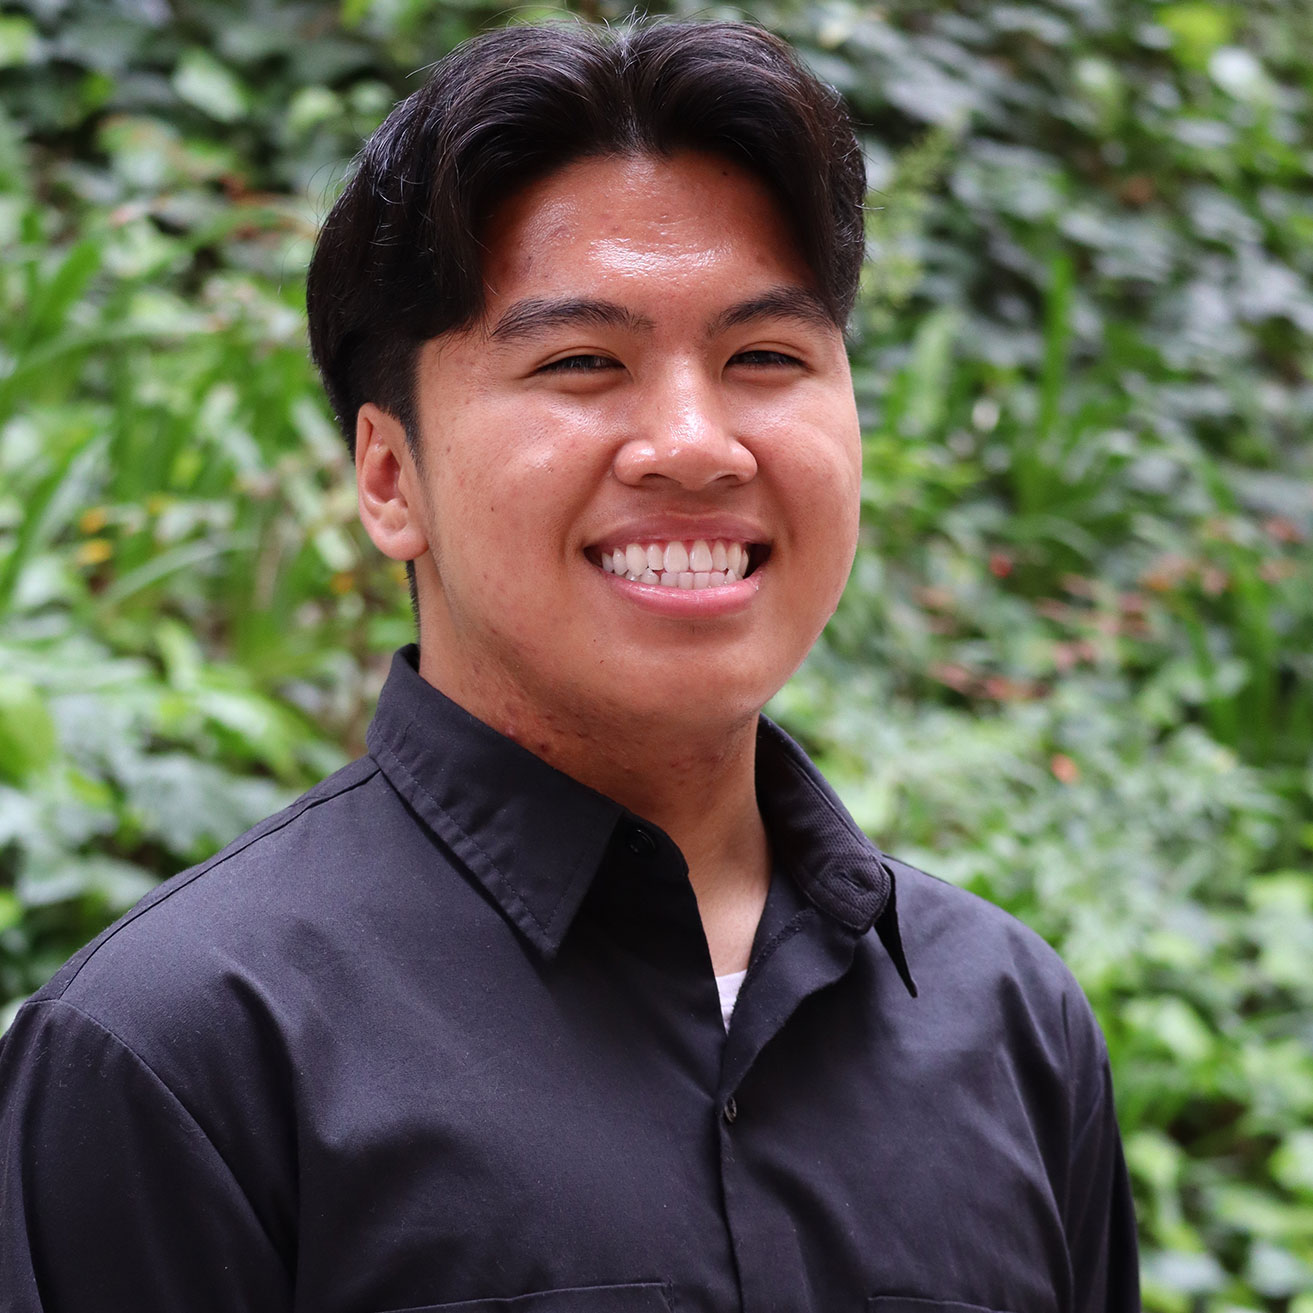 Headshot of scholar. Green plants behind scholar. Scholar has short black hair with thick bangs split in the middle. Wearing a black button down shirt. with a white undershirt. Has a big smile